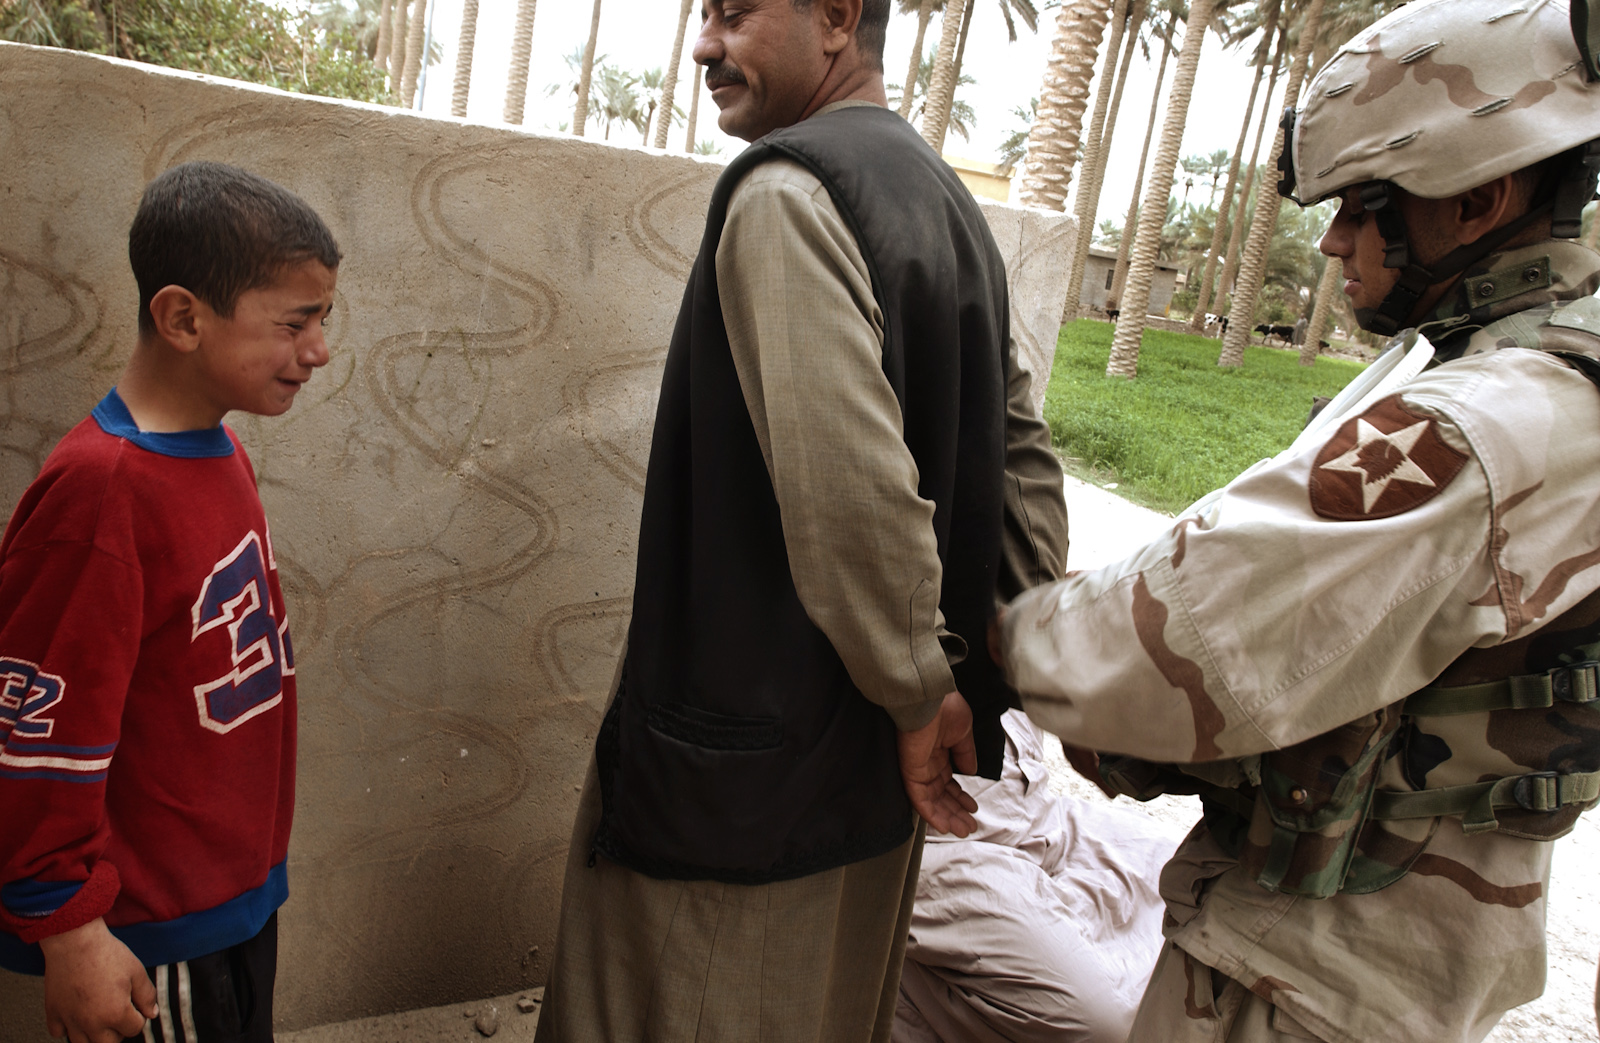 During a house to house search for insurgents in Ramadi, a boy cries as his father is taken away by U.S. soldiers, March 07, 2005.